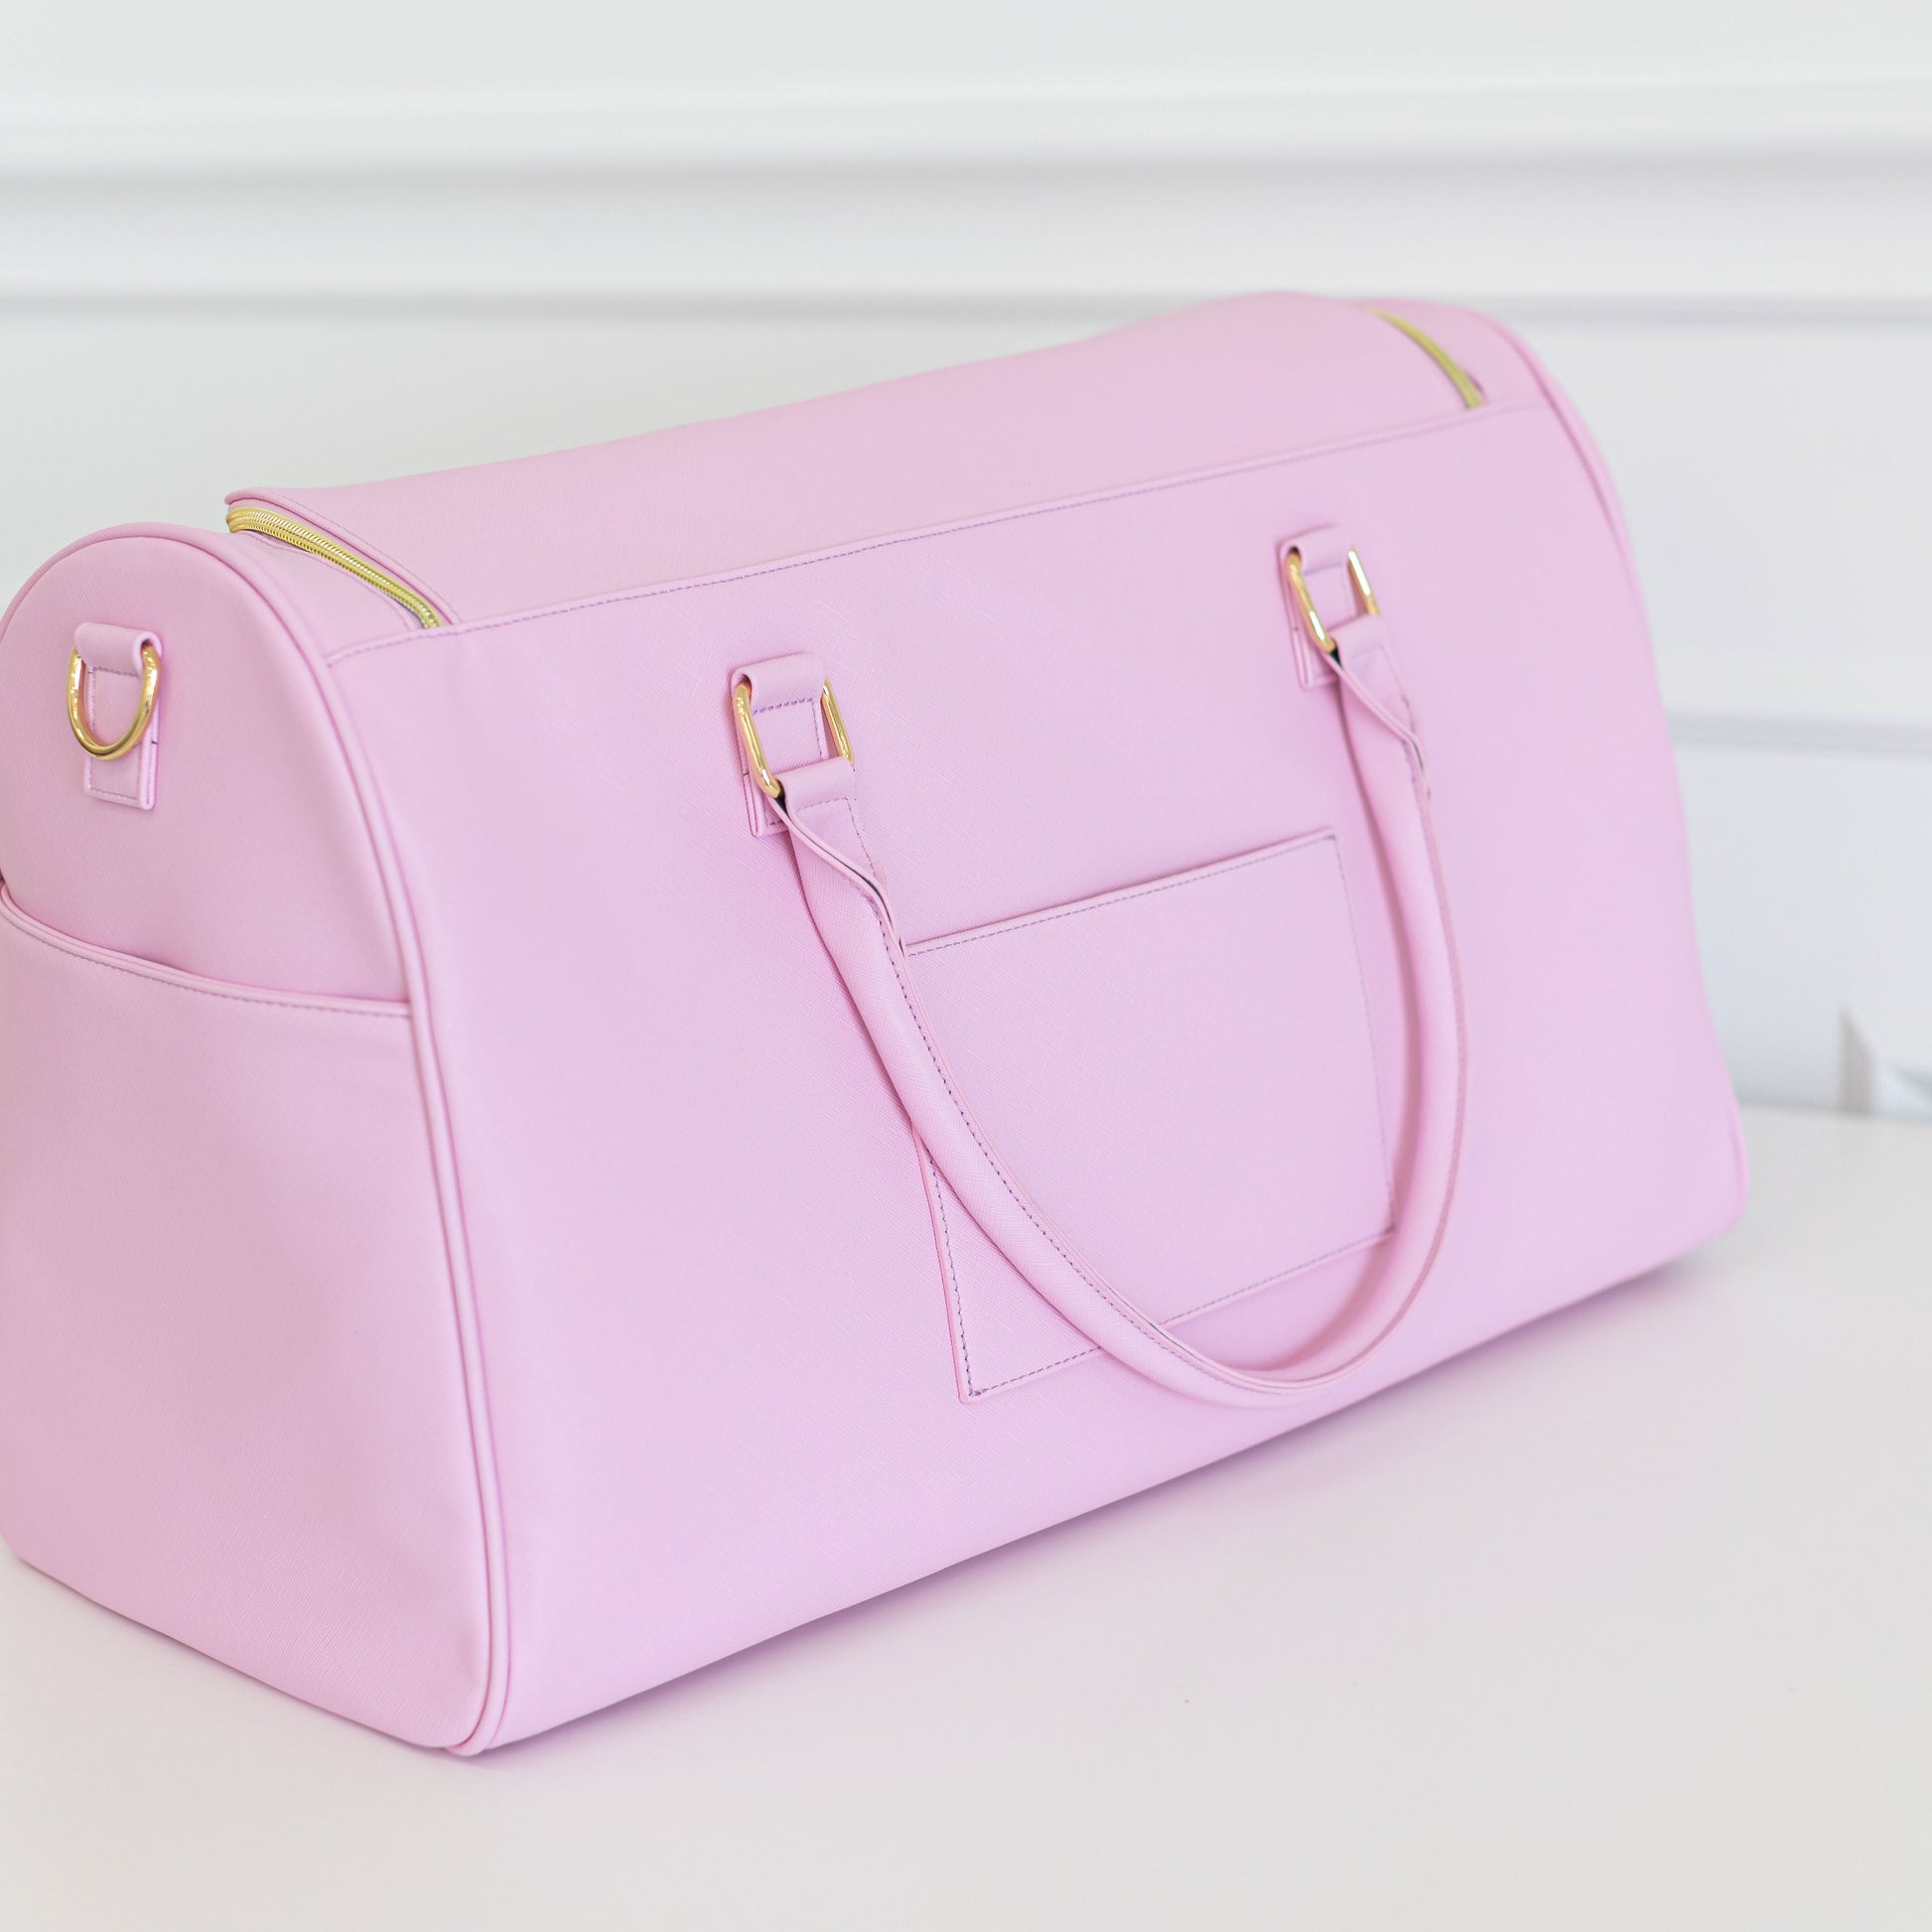 Pink leather duffle bag